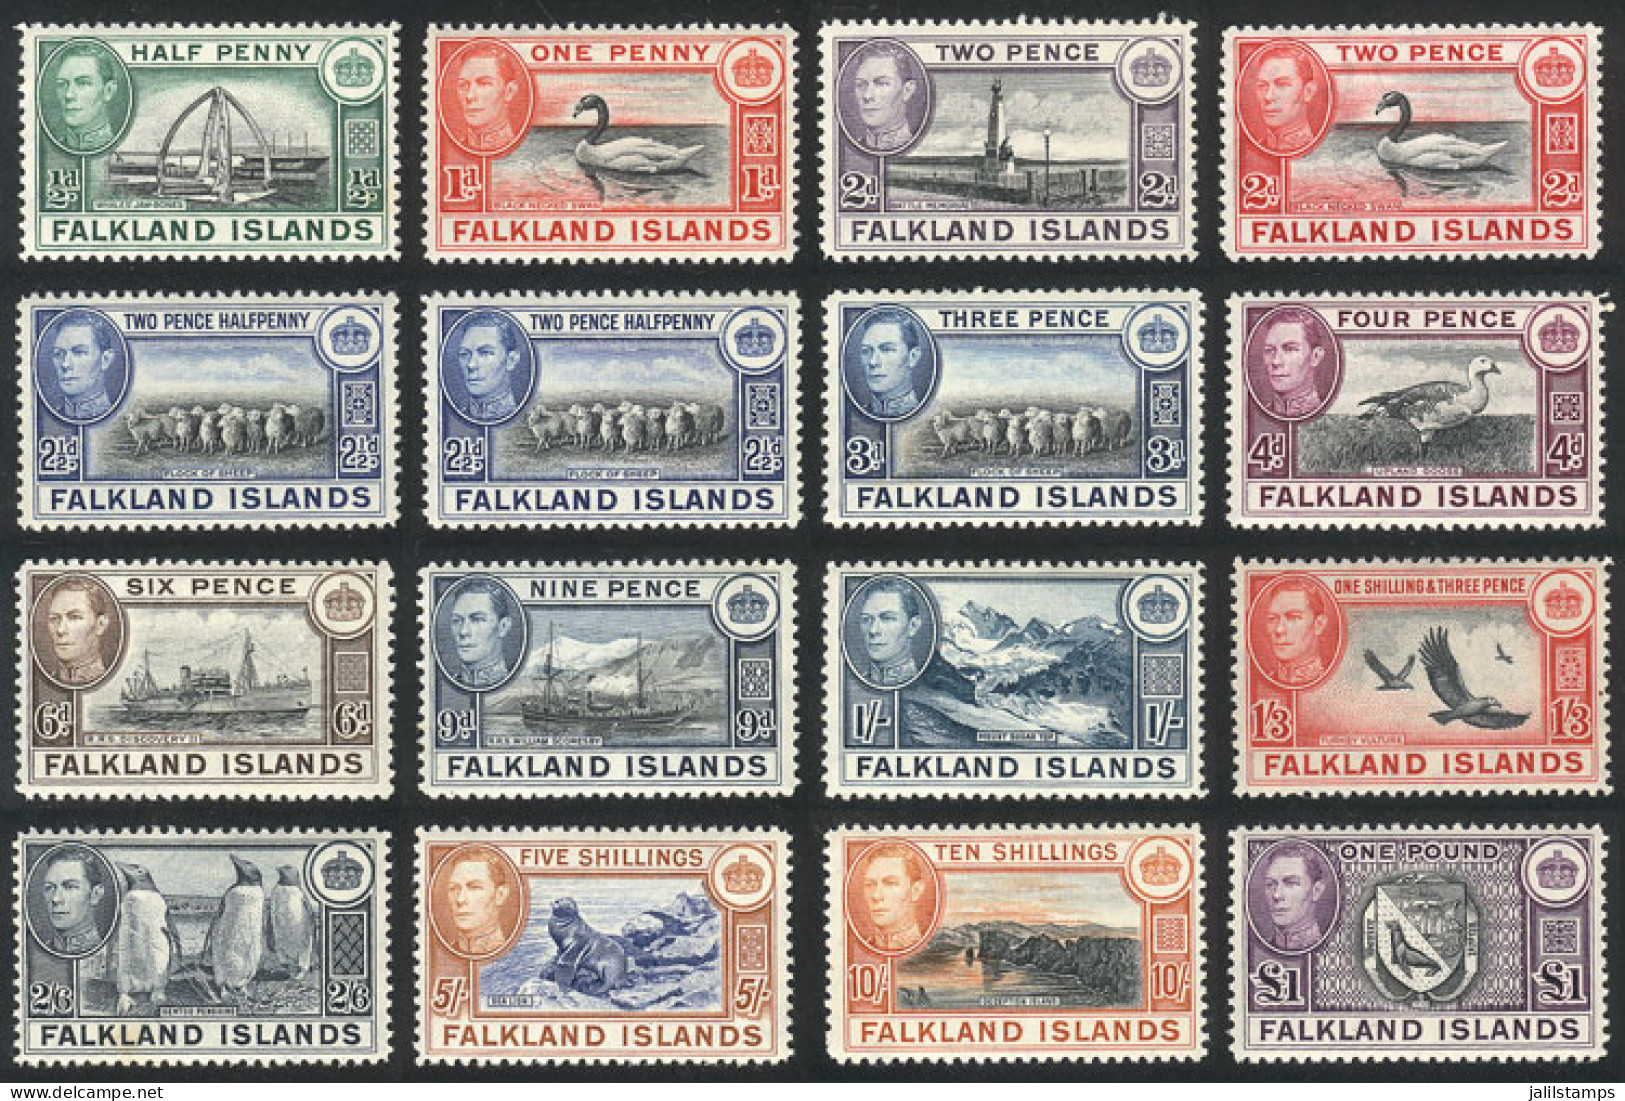 FALKLAND ISLANDS/MALVINAS: Sc.84/96 (without 85B), 1938/46, 15 Values Of The Set Of 16 (only The 1p. Violet Missing), MN - Falkland